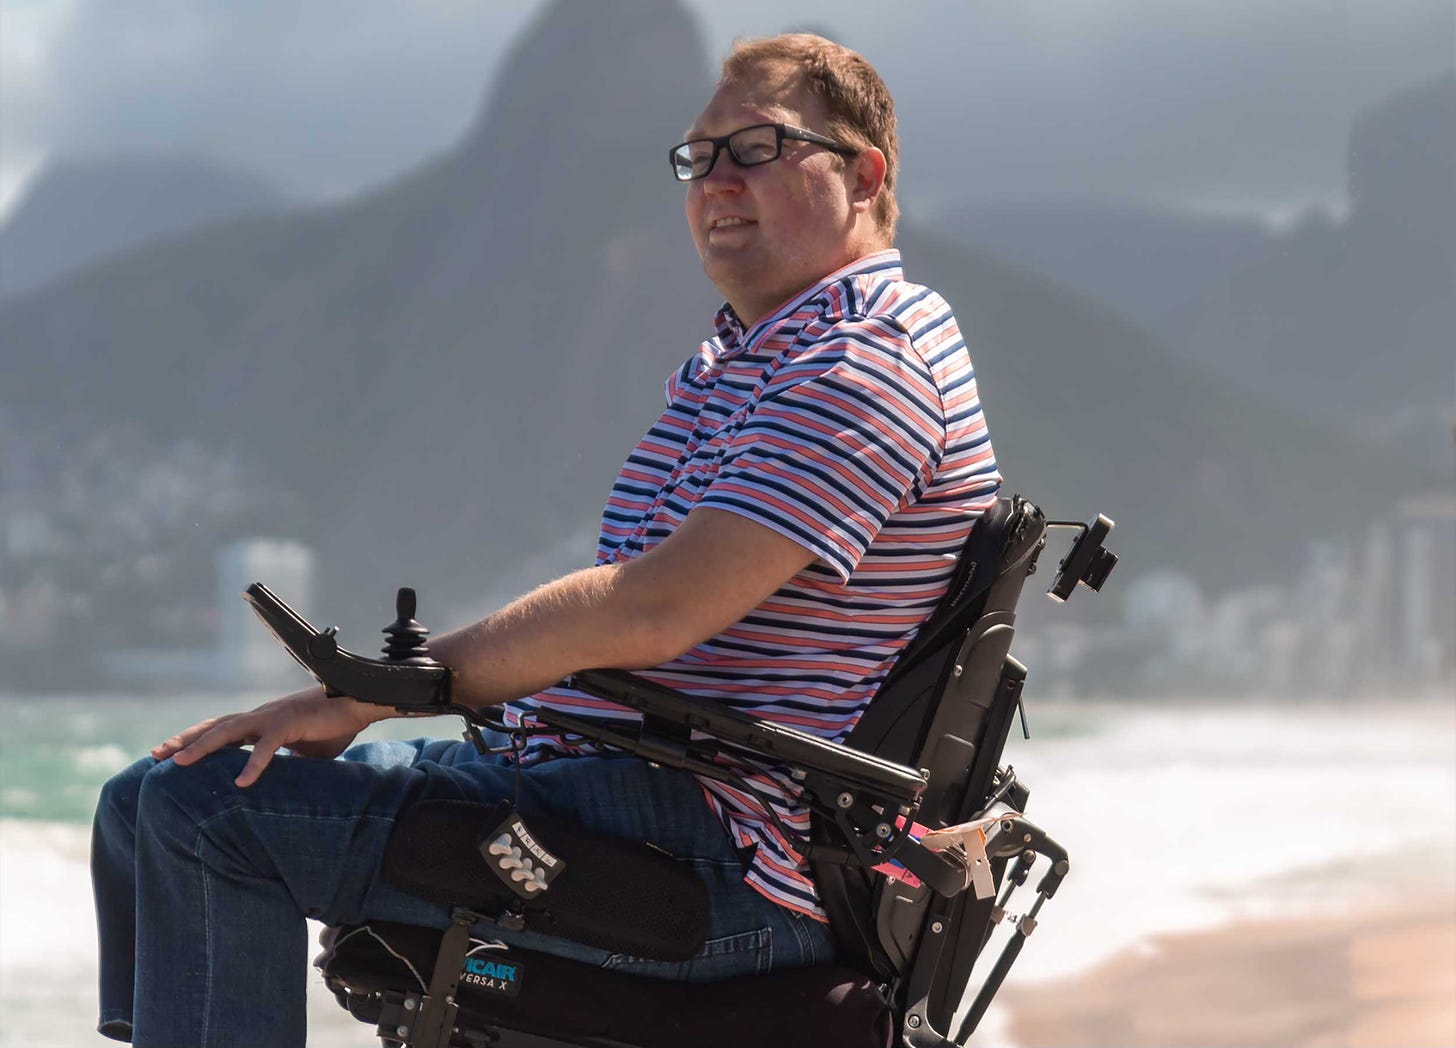 John seated in his wheelchair next to a beach with mountains in the background.